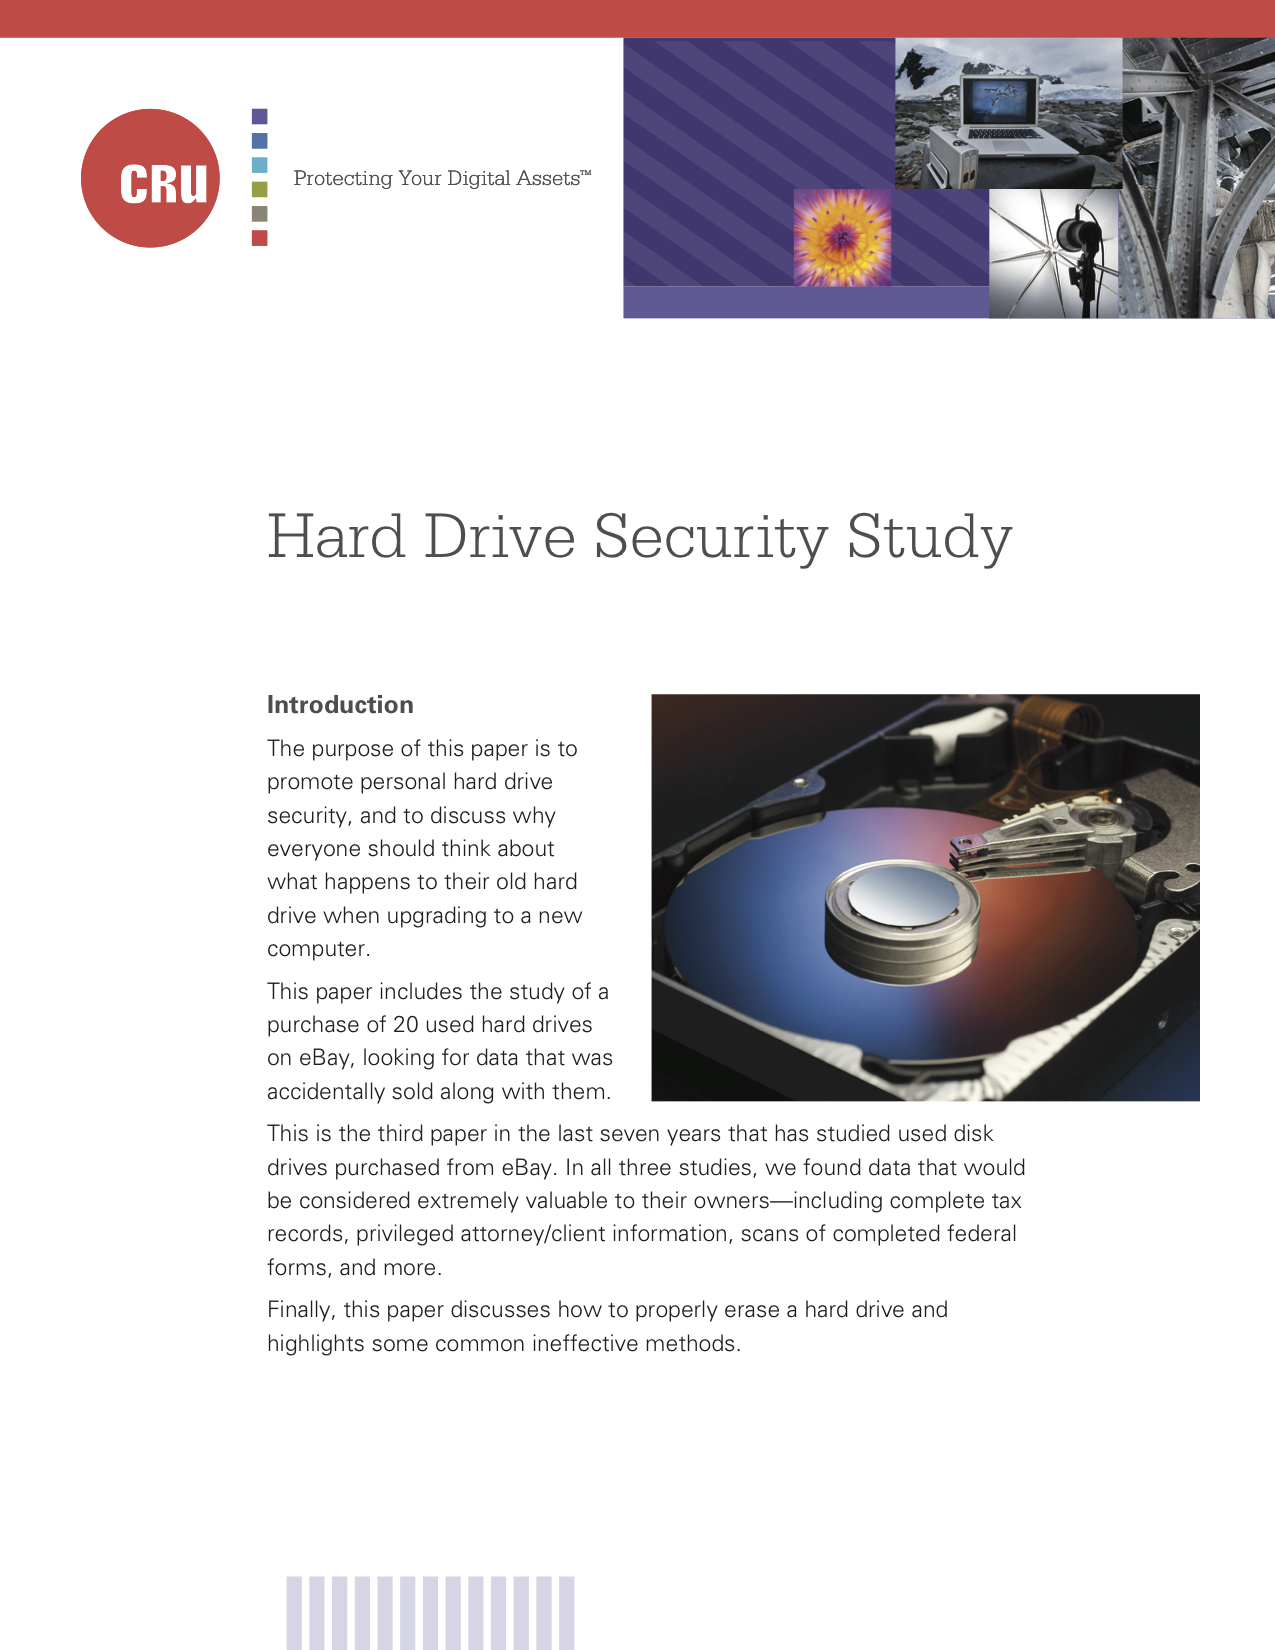 Hard_Drive_Security_Paper_p1